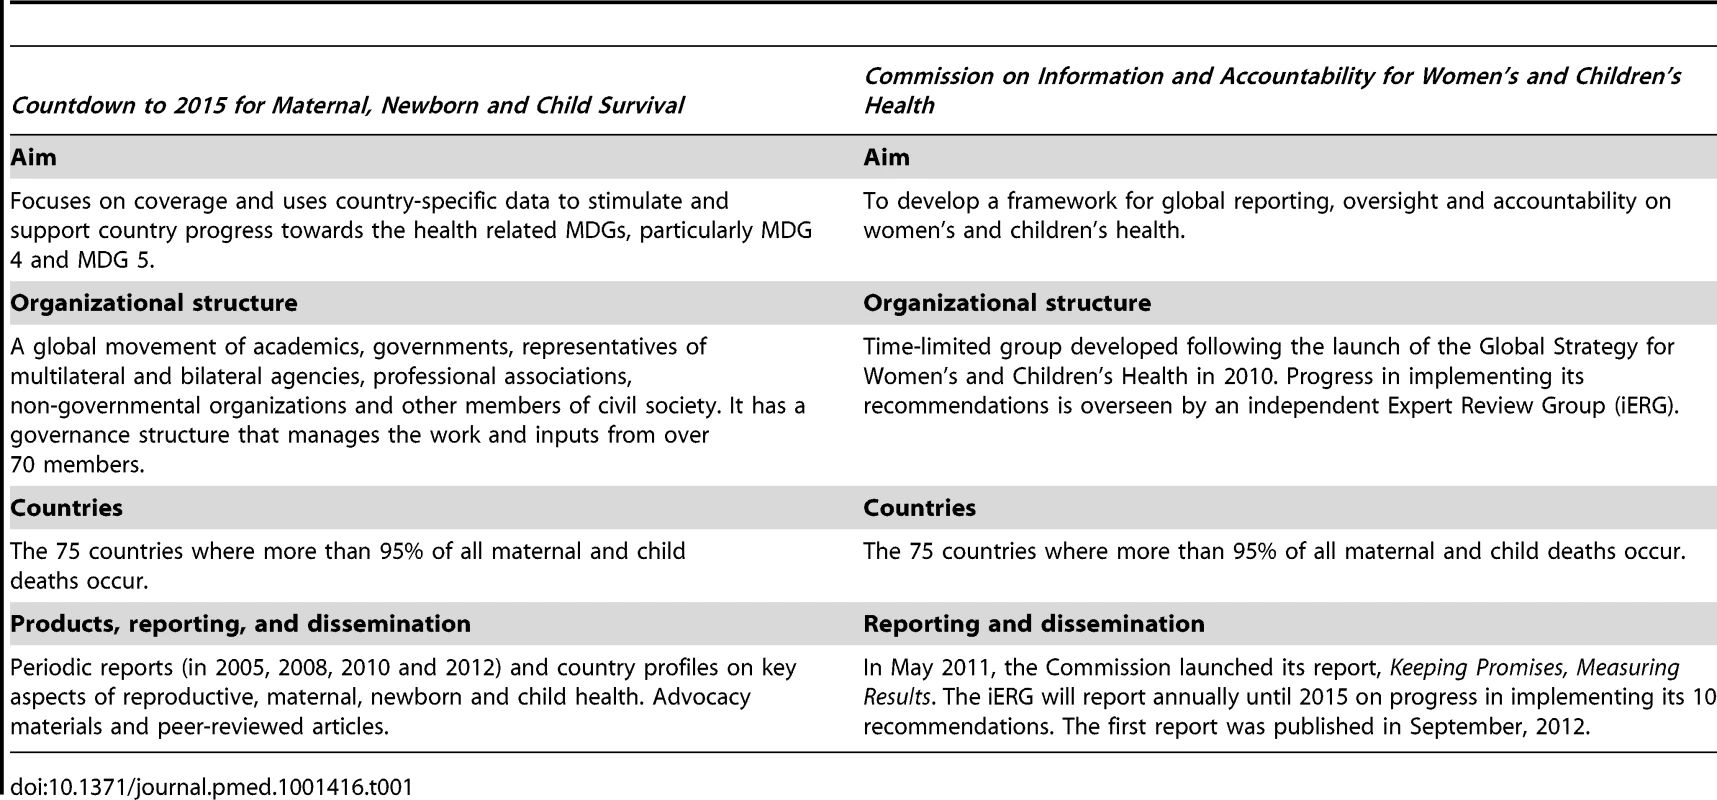 Countdown to 2015 for Maternal, Newborn and Child Survival and the Commission on Information and Accountability for Women's and Children's Health.